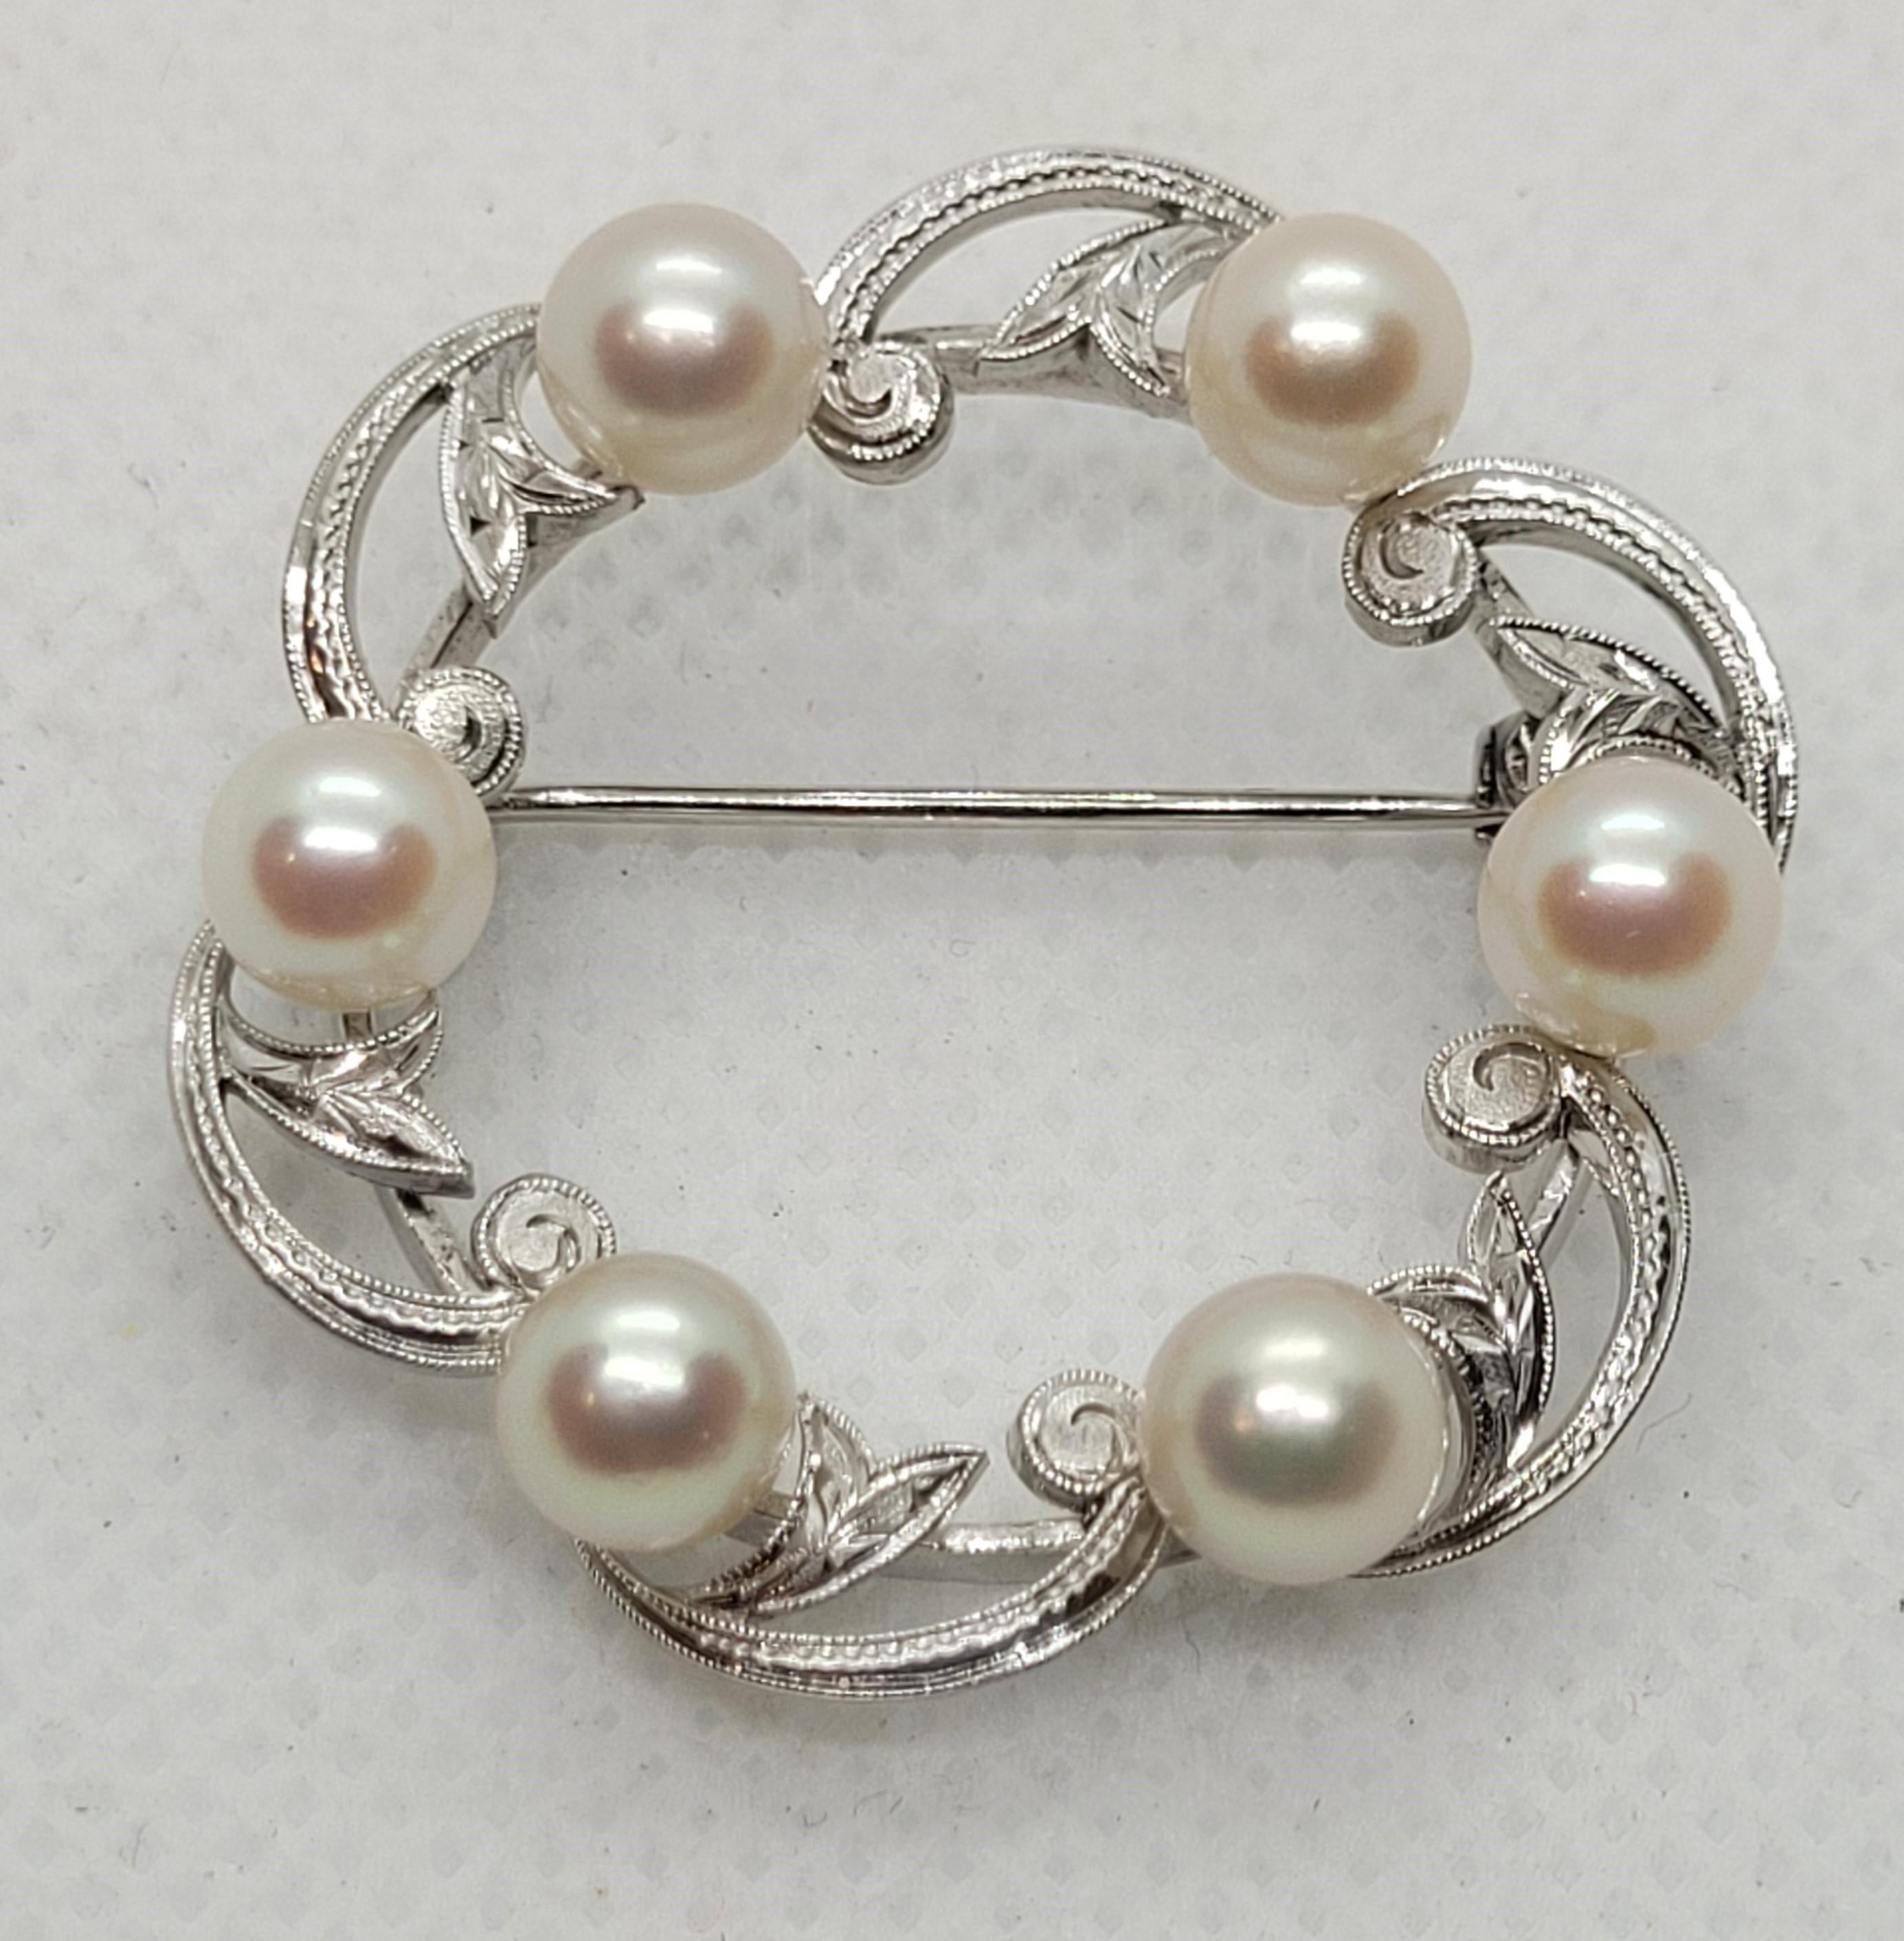 Gorgeous vintage sterling silver pearl Mikimoto brooch; there are six pearls that are 6mm in size, white cultured, with a very clean nacre. These lovely pearls are in a beautiful scroll design brooch/pin that's hand engraved, 33.5mm in diameter, 6.5